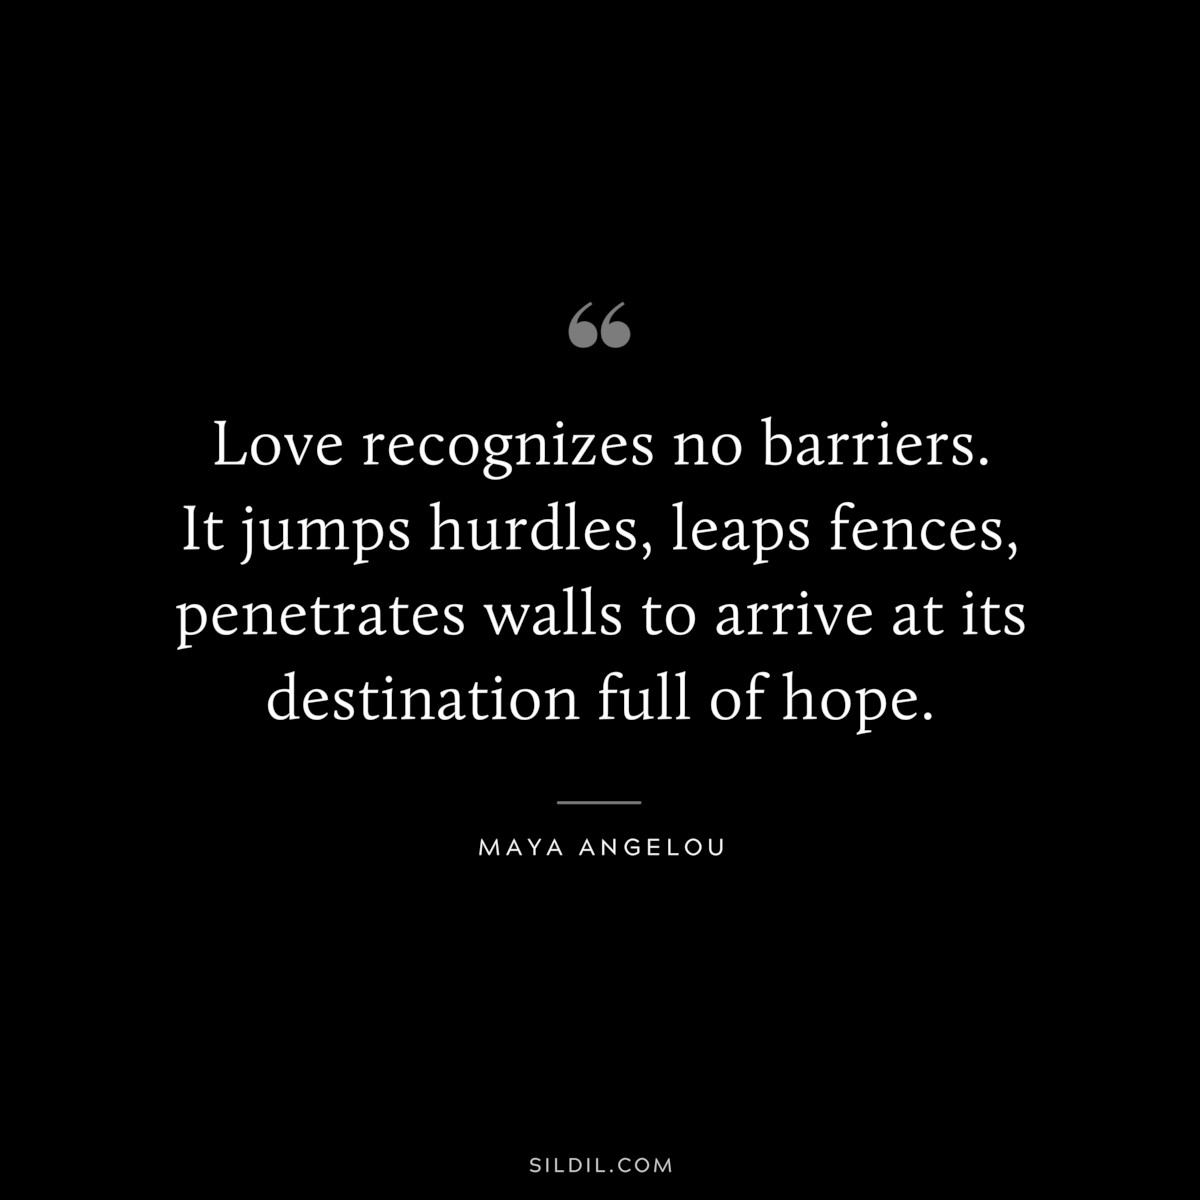 Love recognizes no barriers. It jumps hurdles, leaps fences, penetrates walls to arrive at its destination full of hope. ― Maya Angelou